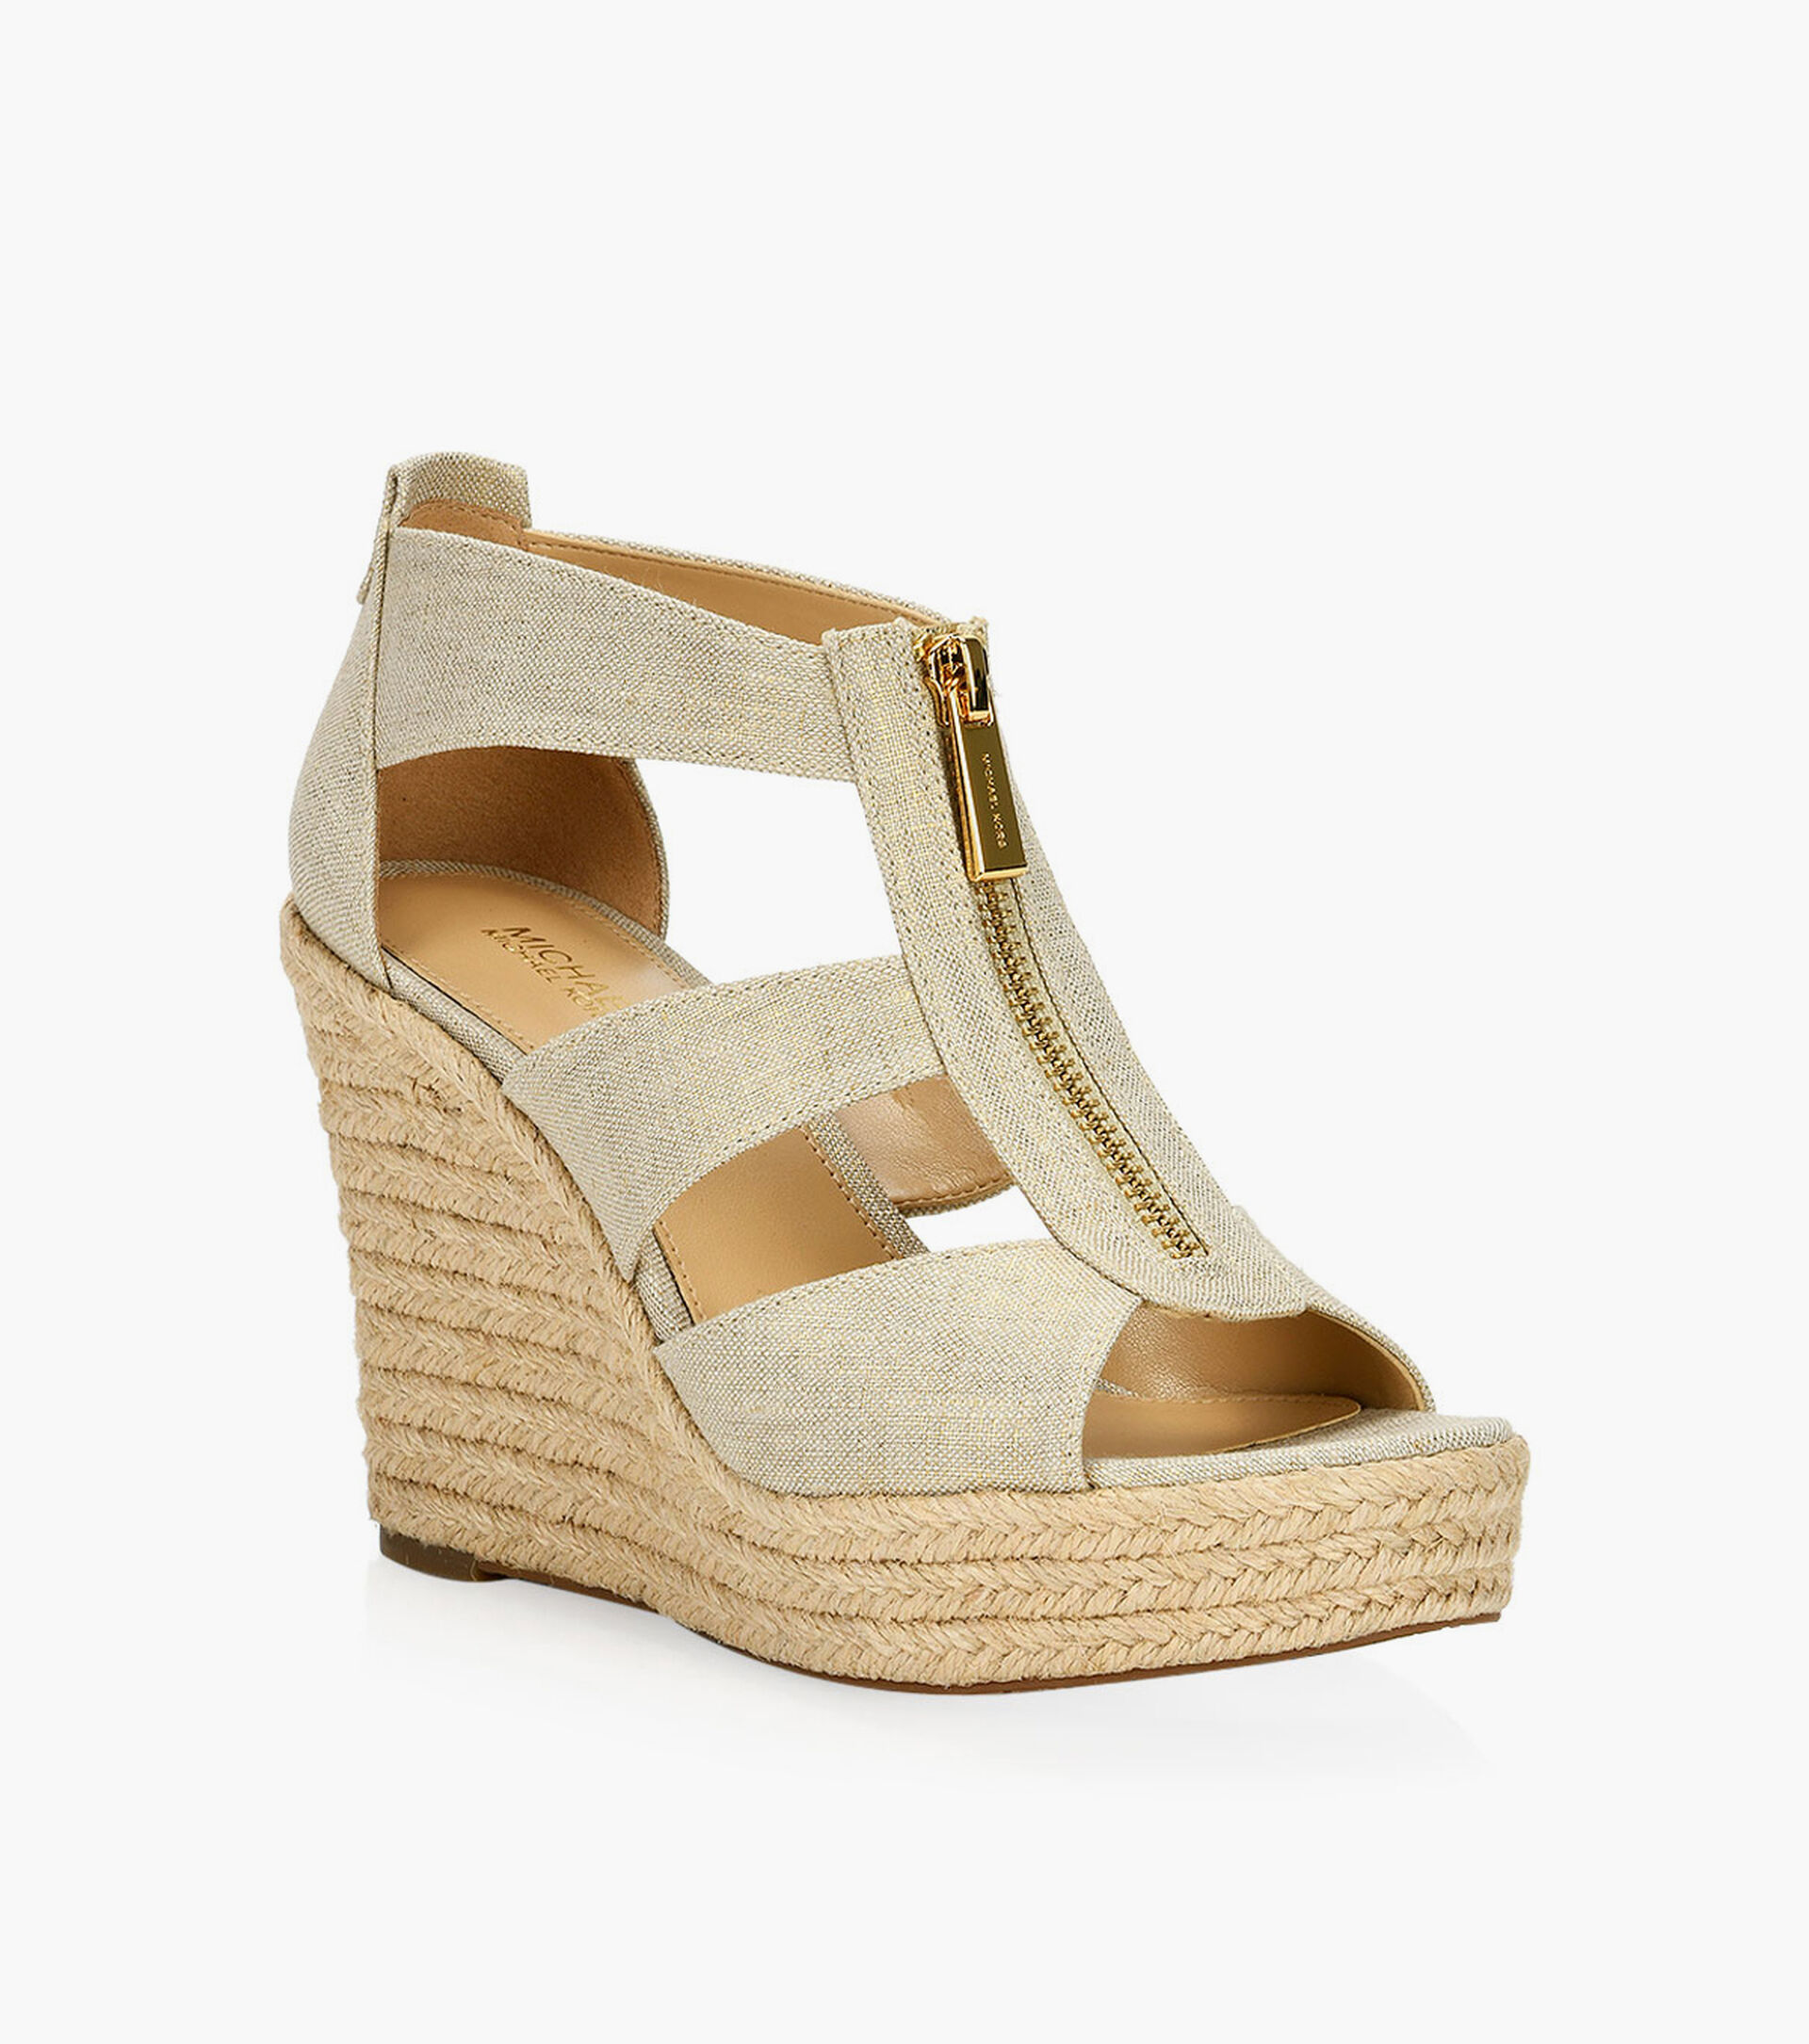 MICHAEL MICHAEL KORS WEDGE - Fabric Browns Shoes